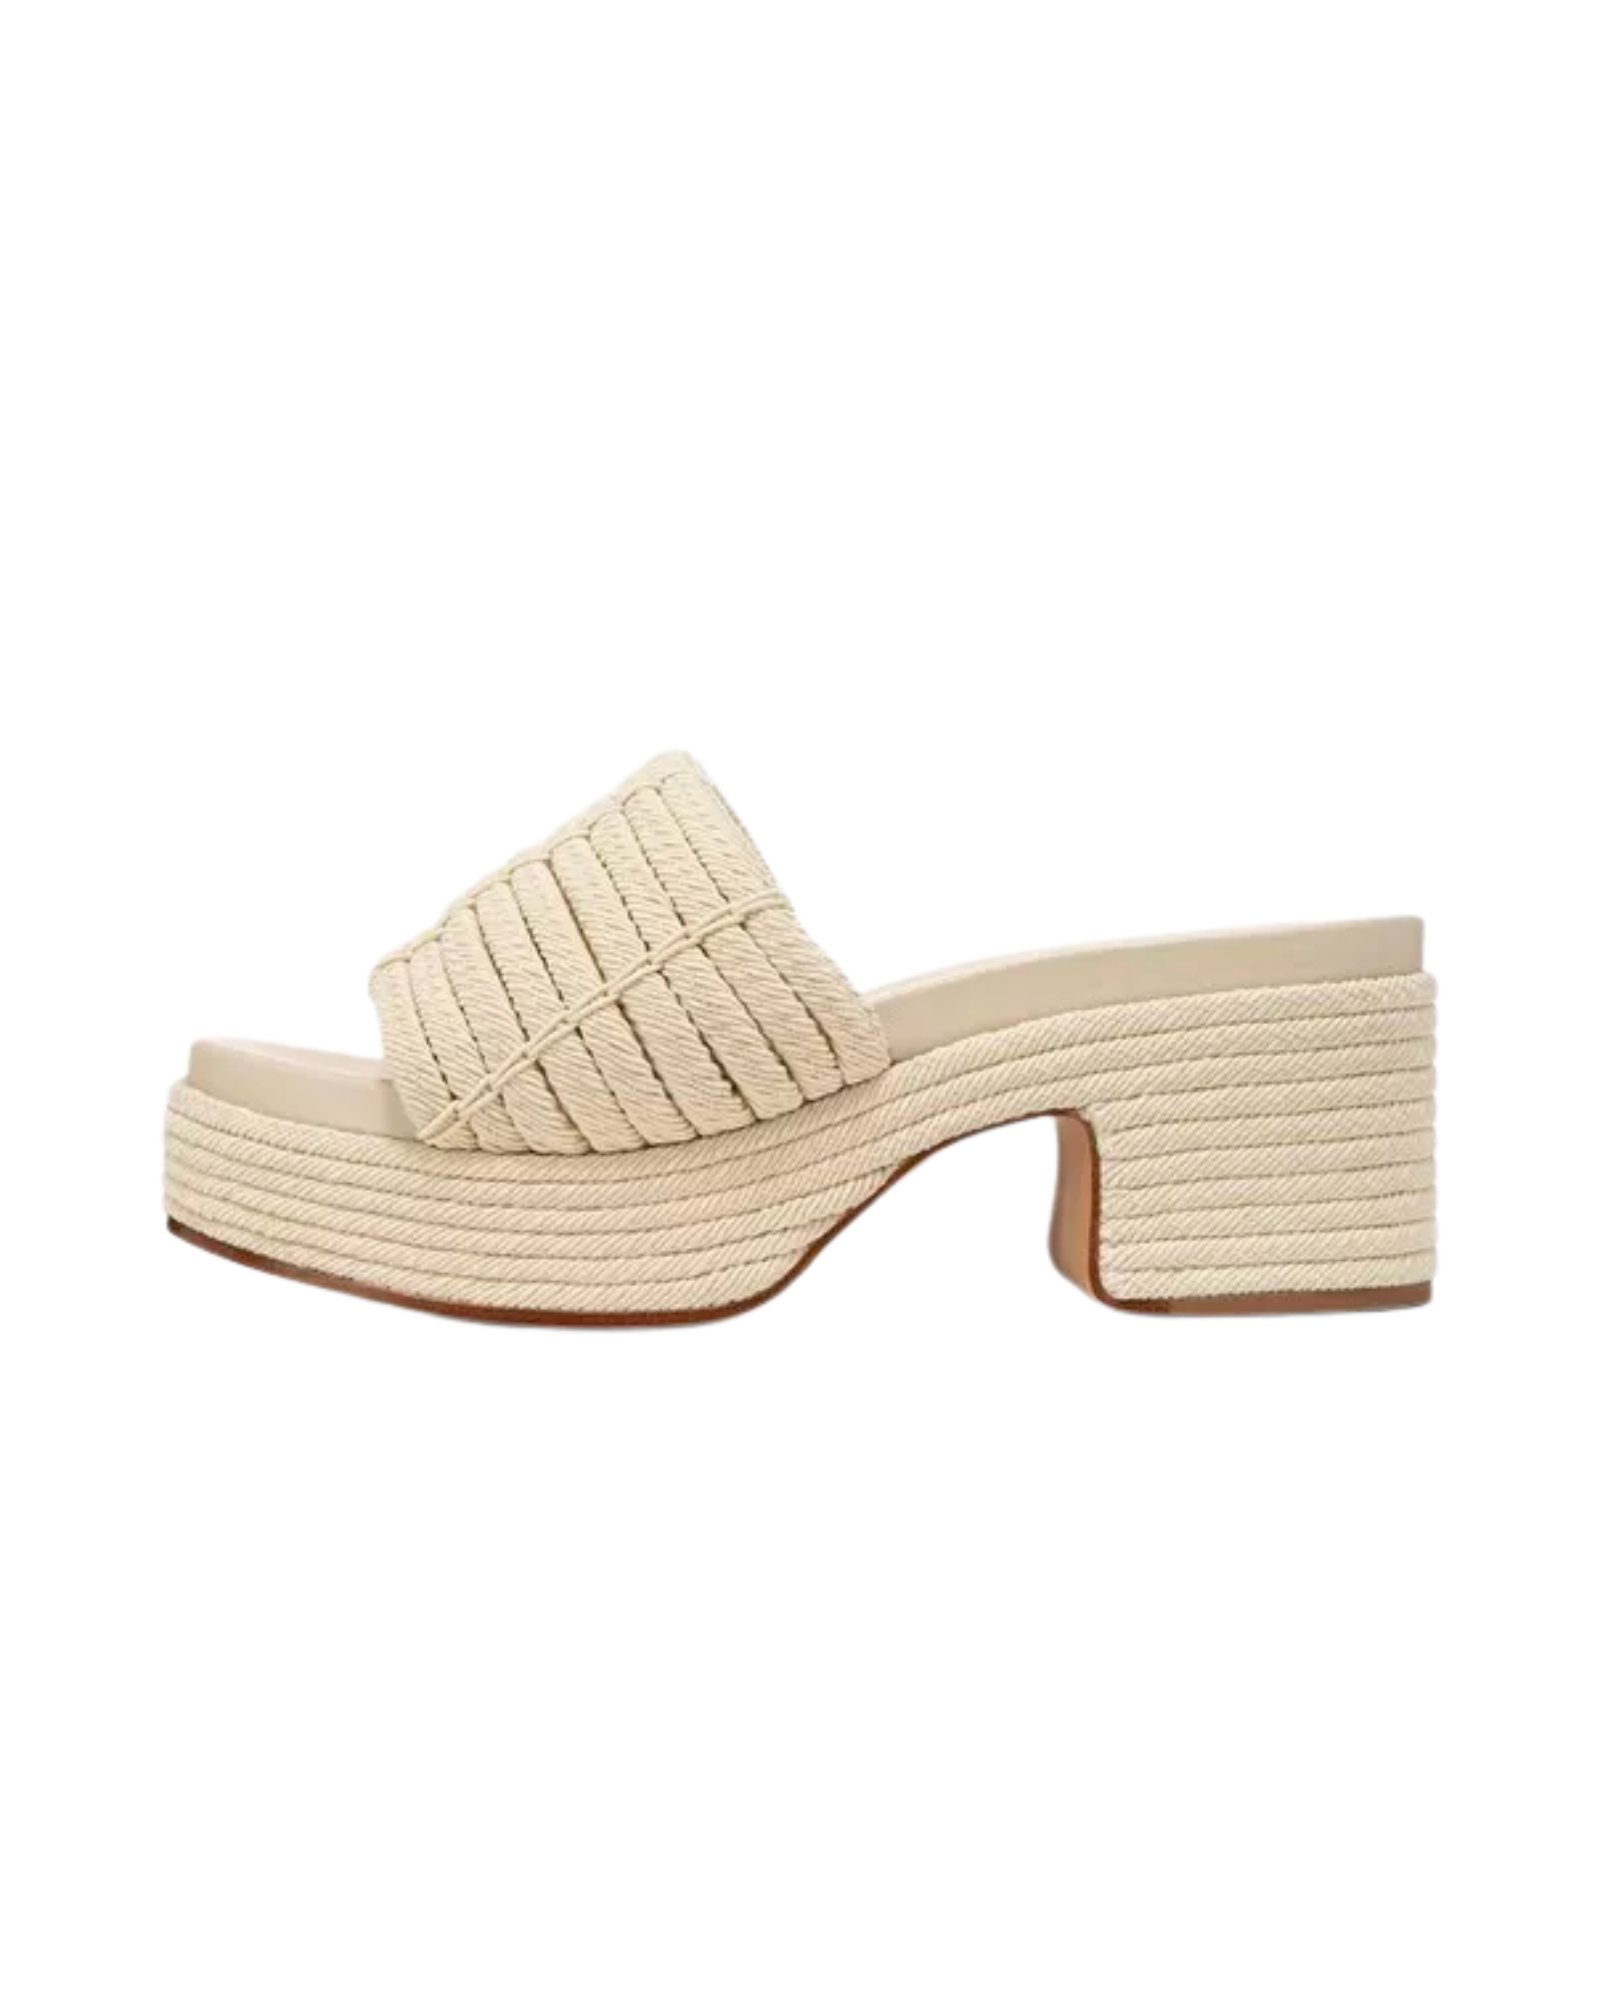 Vince Margo Cord Sandal in Marble Cream